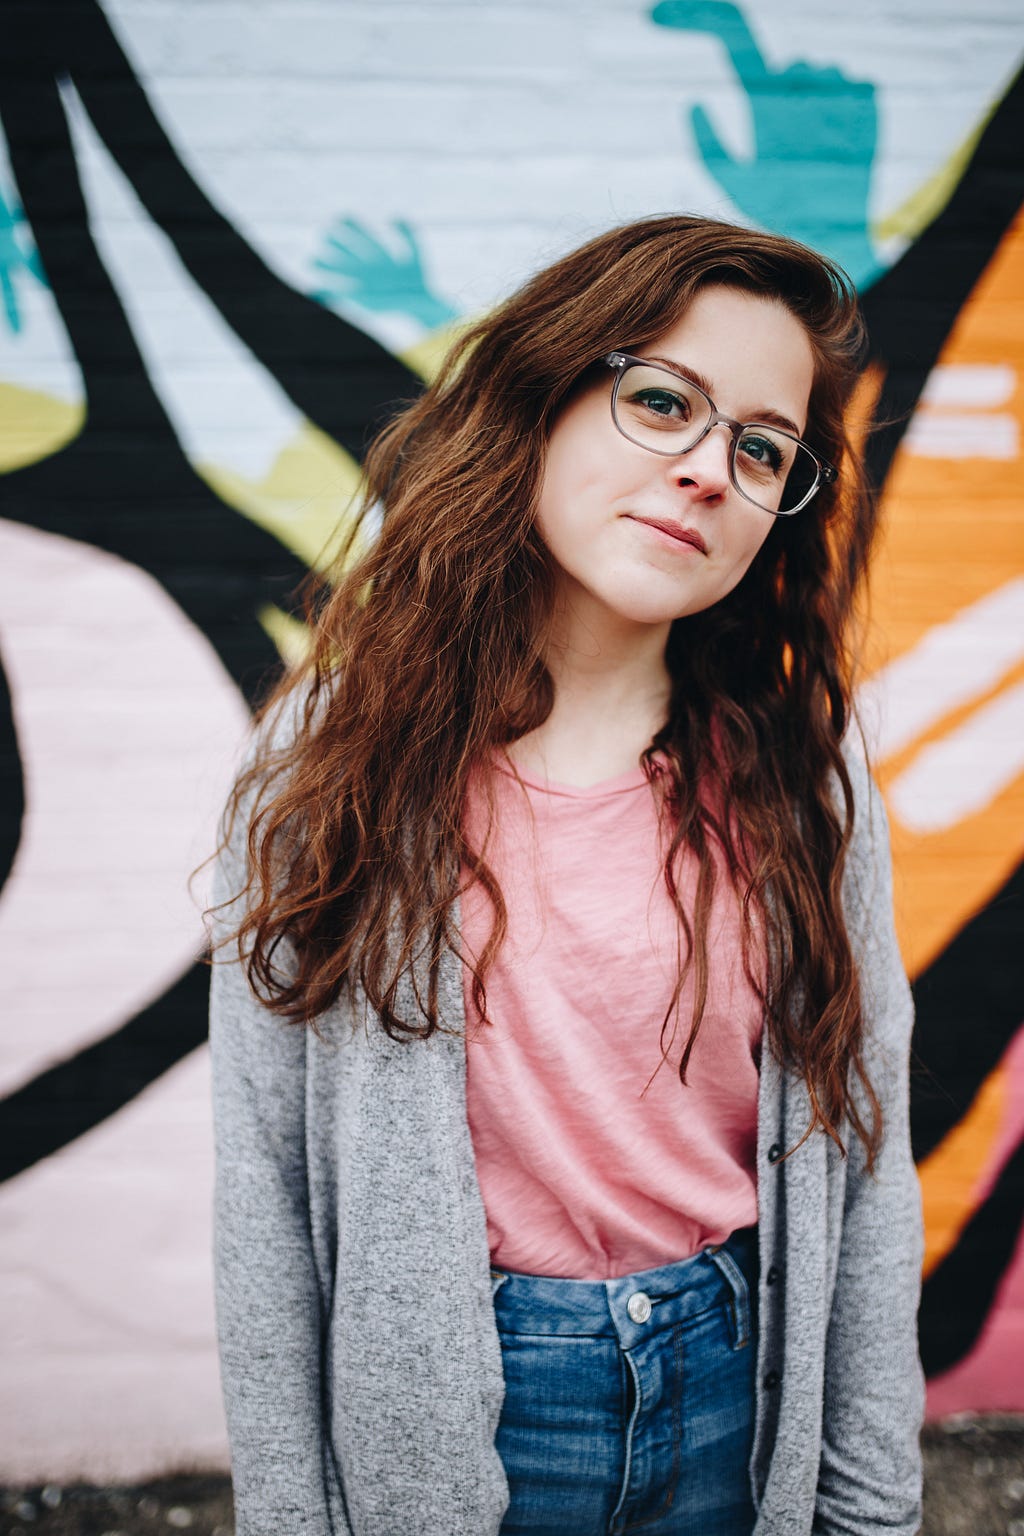 My persona, Ria, long wavy but not quite curly red hair, glasses, dressed in a casual pink t-shirt, jeans and a grey cardigan, standing in front of a very vibrant painted wall.